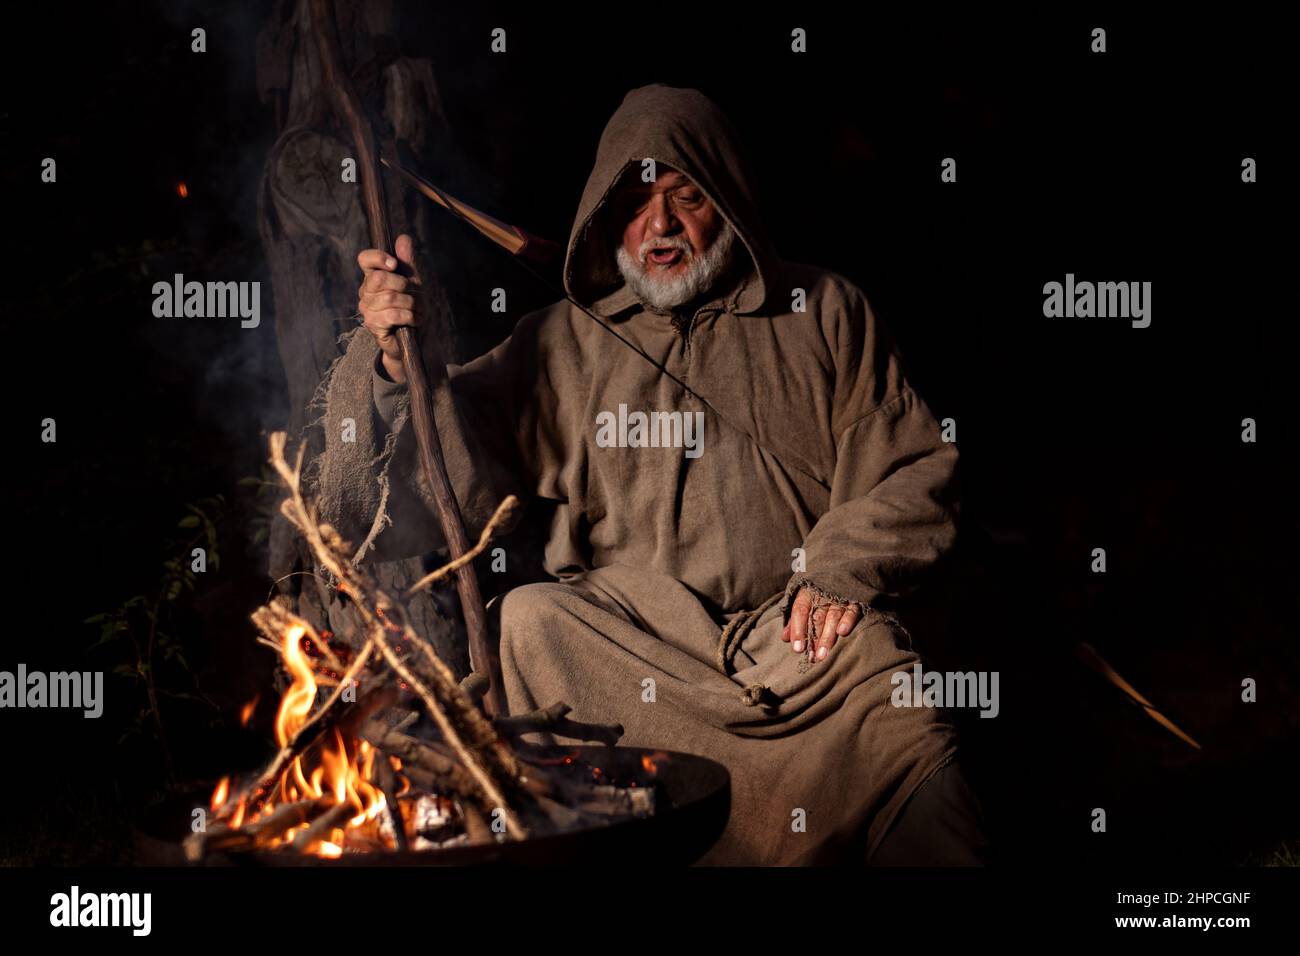 Monk in the Middle Ages sings around the campfire Stock Photo